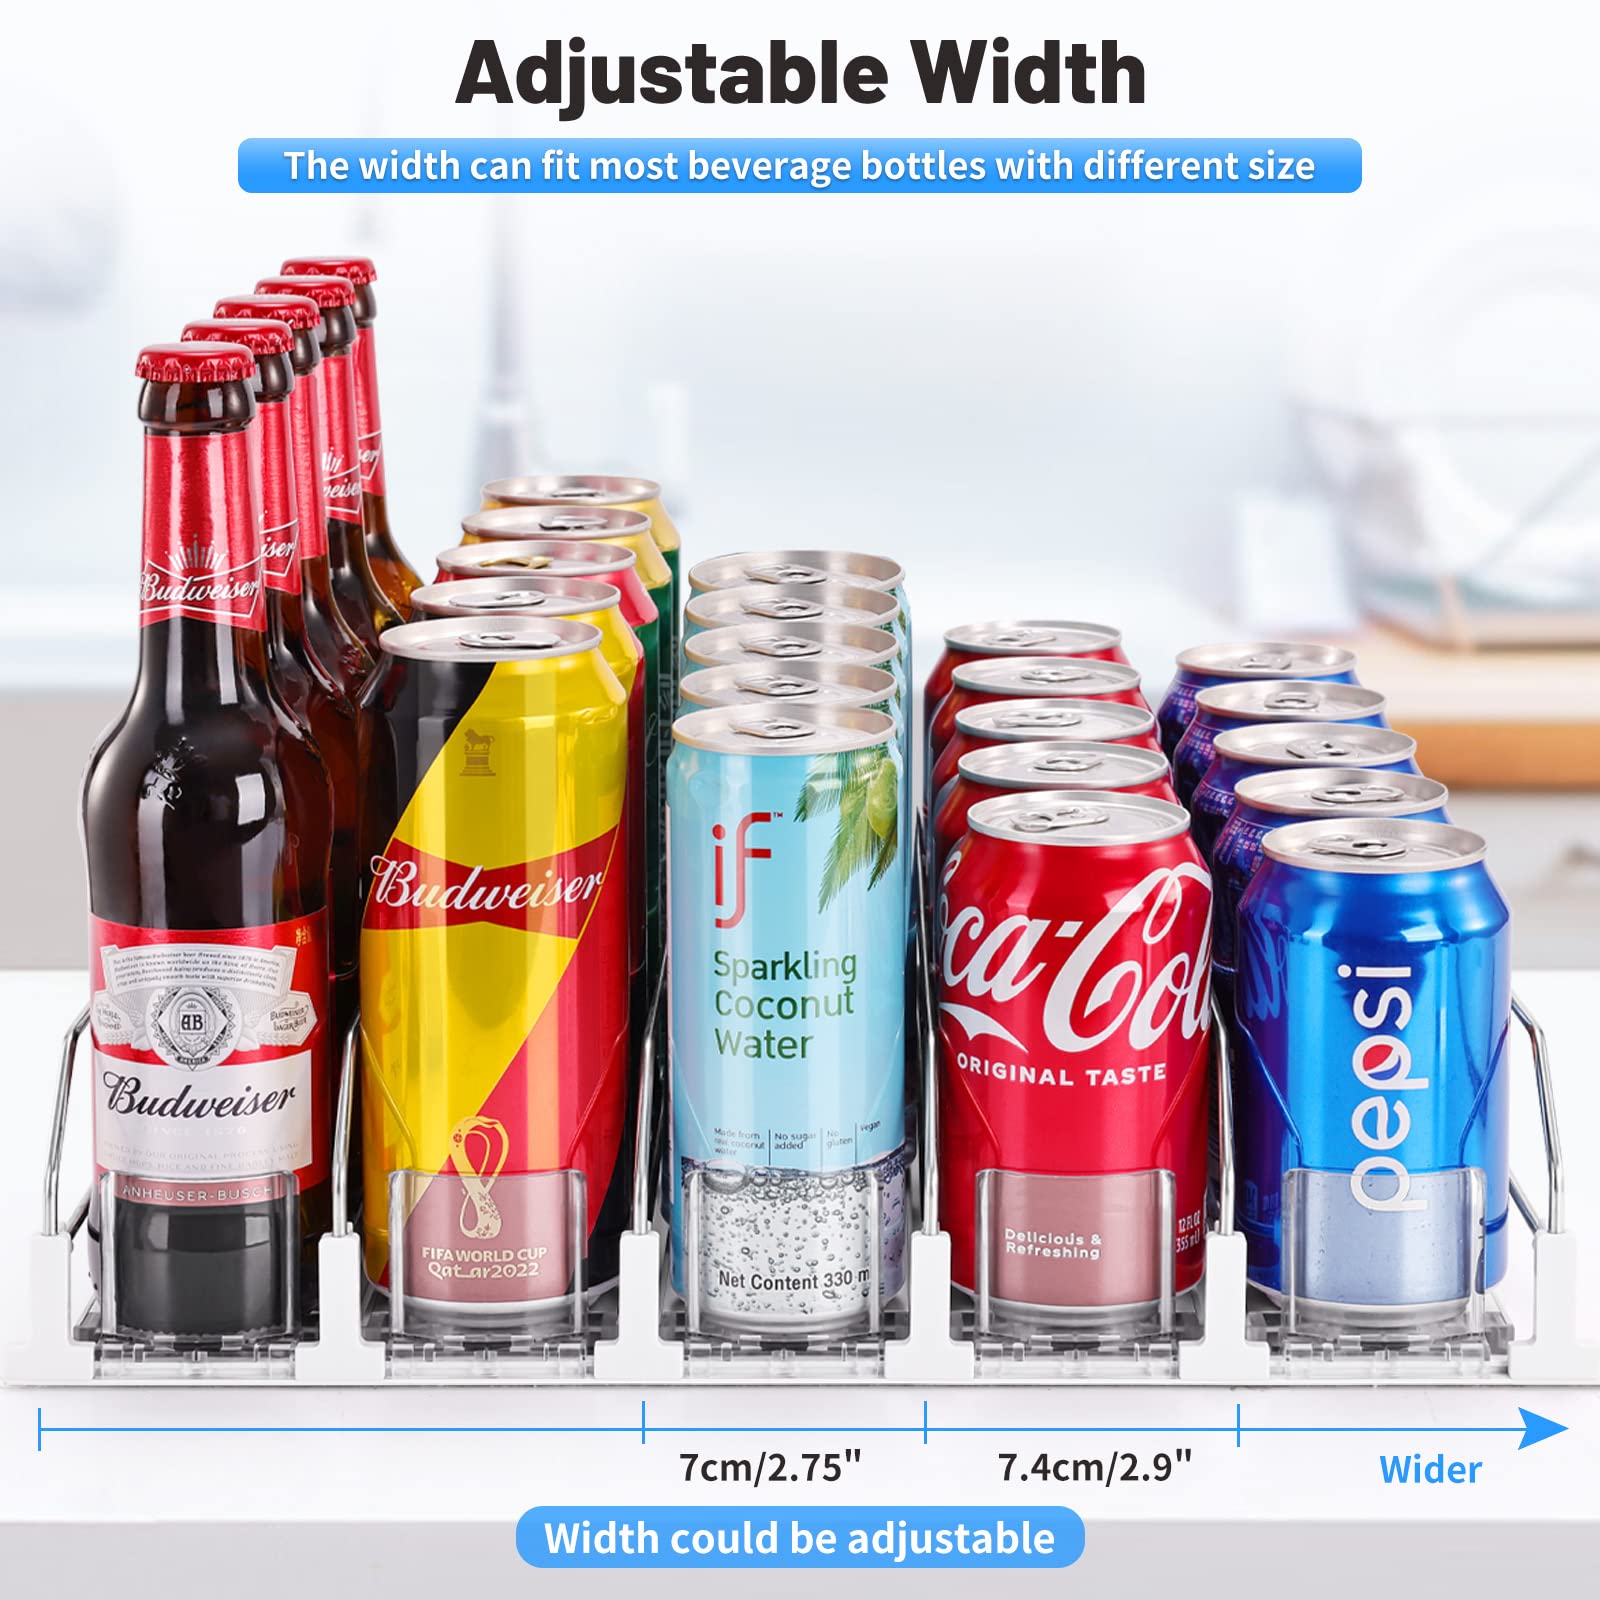 LAKIX Drink Organizer for Fridge, Self-Sliding Soda Can Organizer for Refrigerator and Adjustable Width, 12oz 16oz 20oz drinks can be accommodated, up to 25 Cans（5 Rows, 41 CM）